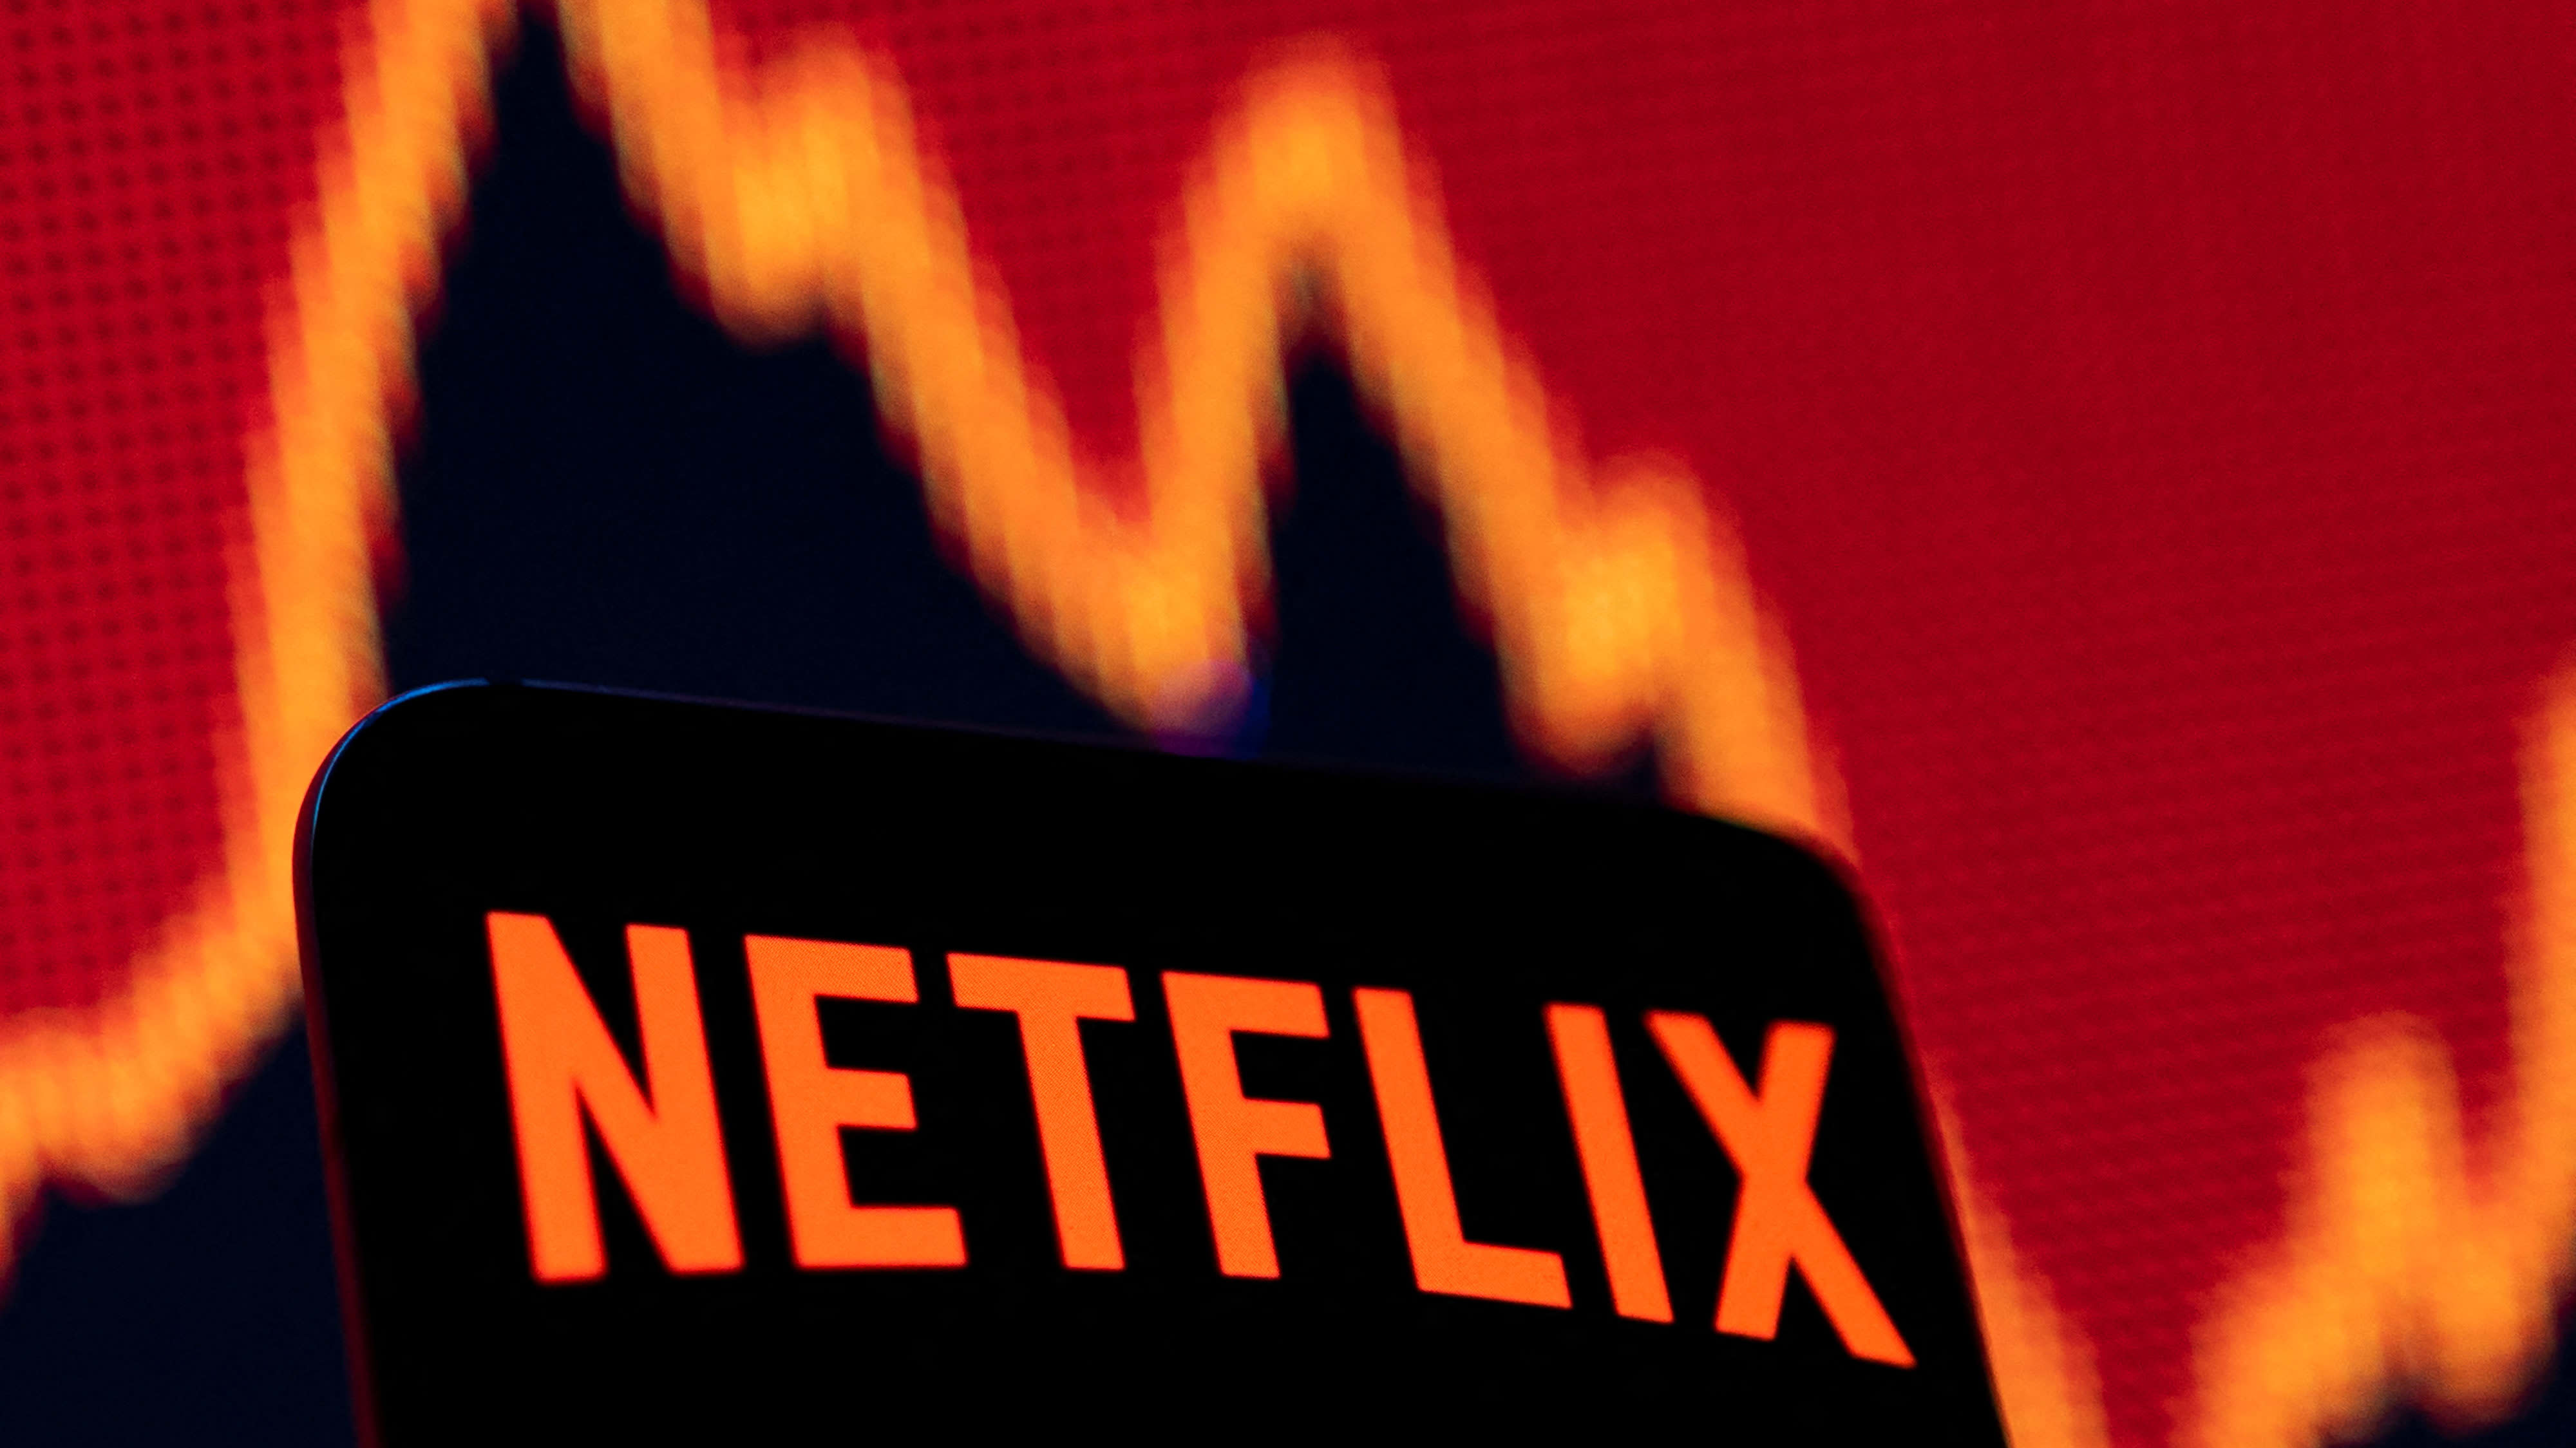 Secret Netflix Codes: With This Ingenious Trick, You Can Find Lots